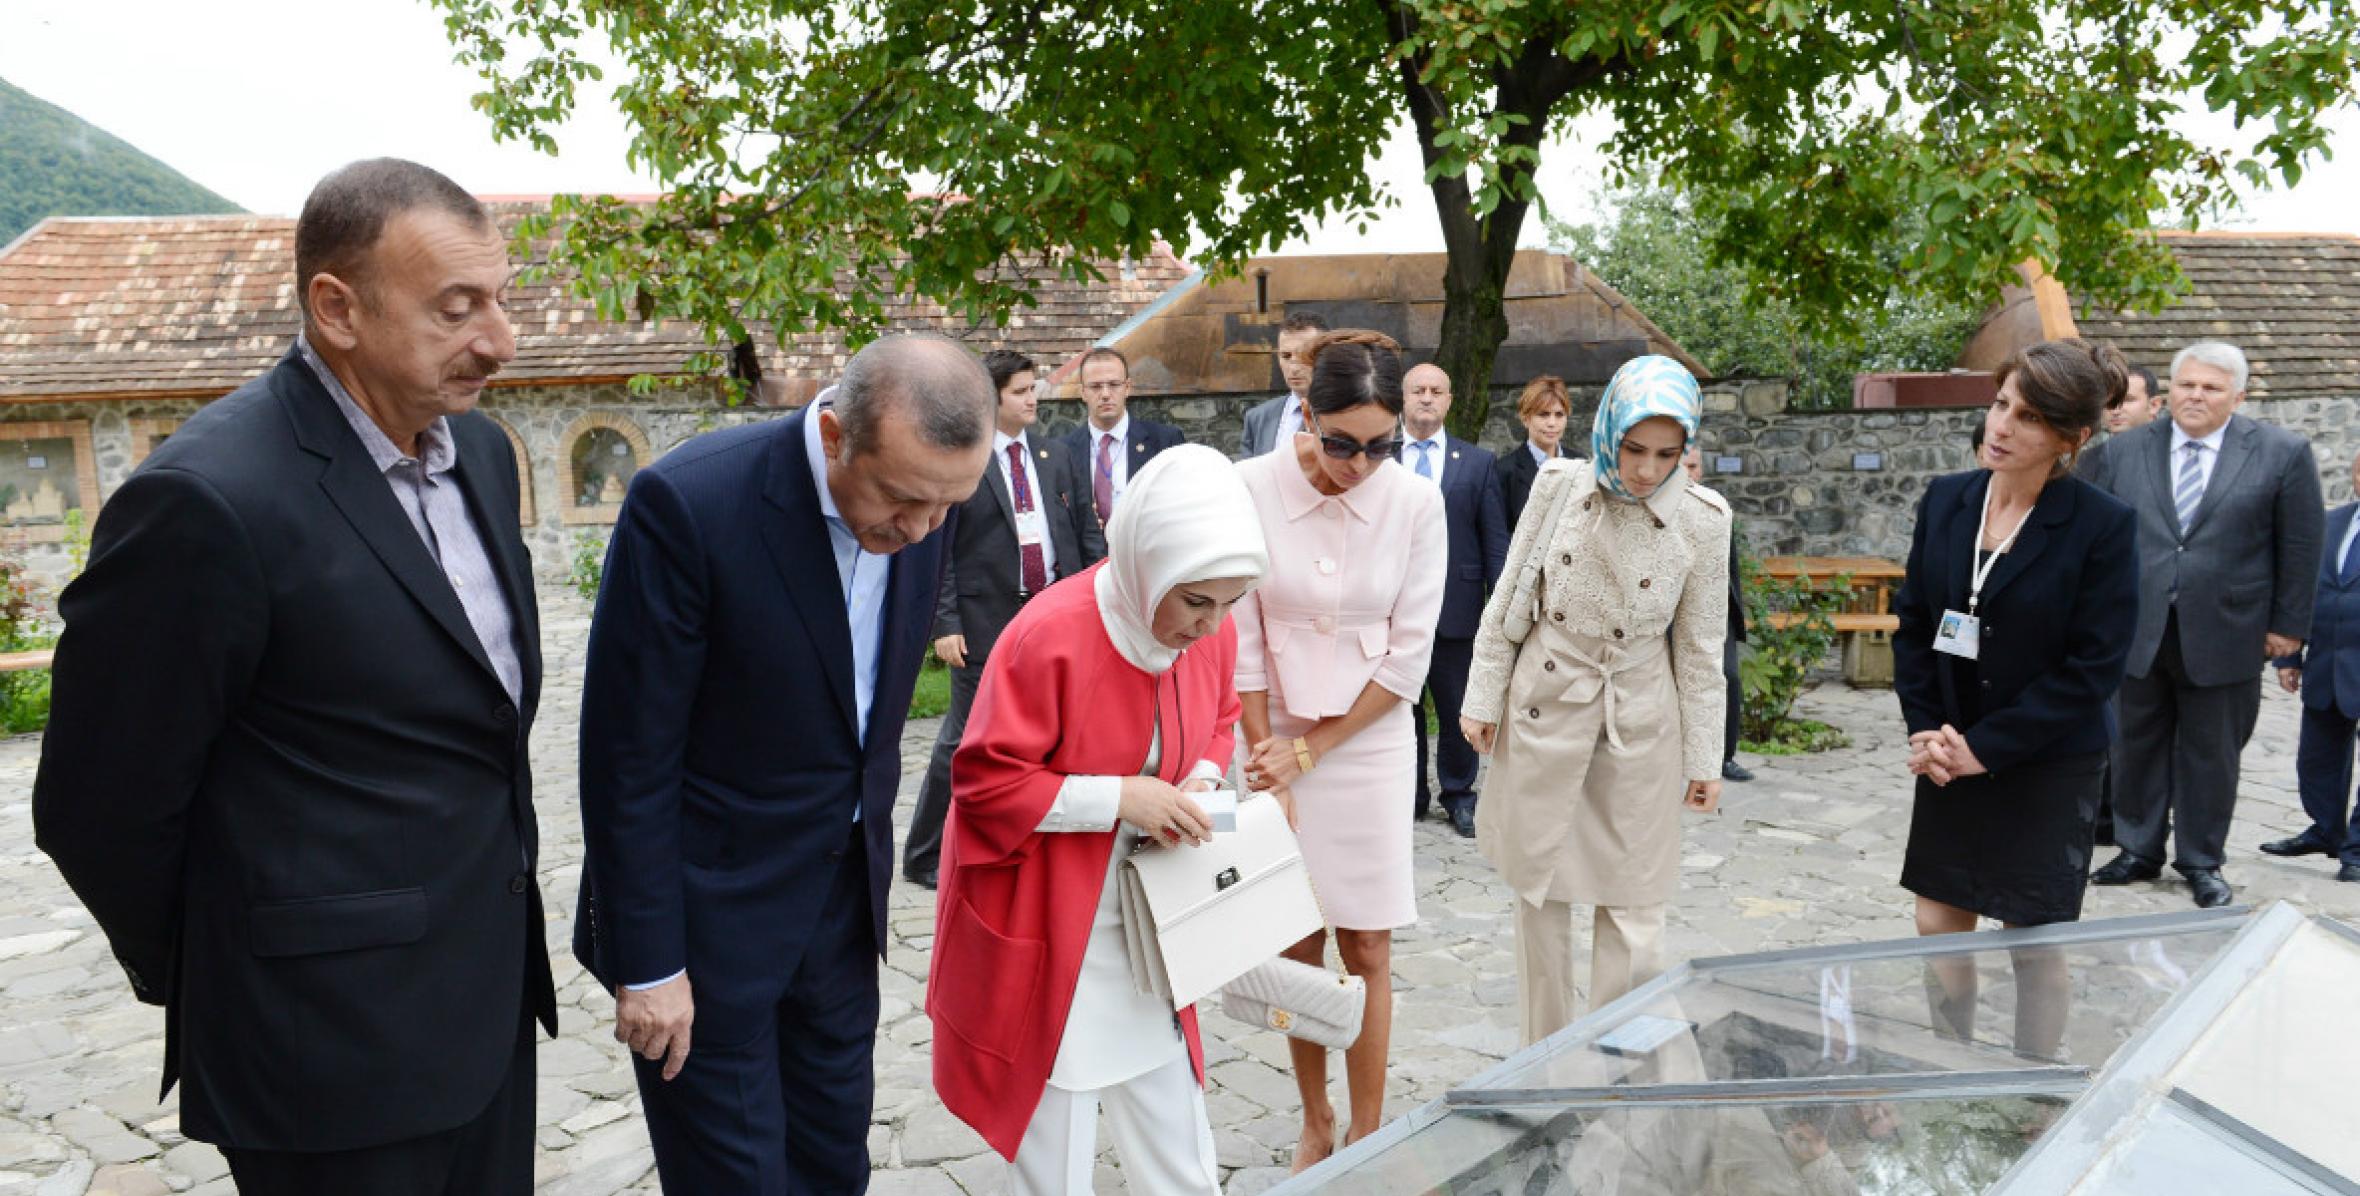 Ilham Aliyev and Prime Minister Recep Tayyip Erdogan visited the Alban temple in the Kish village of Shaki District